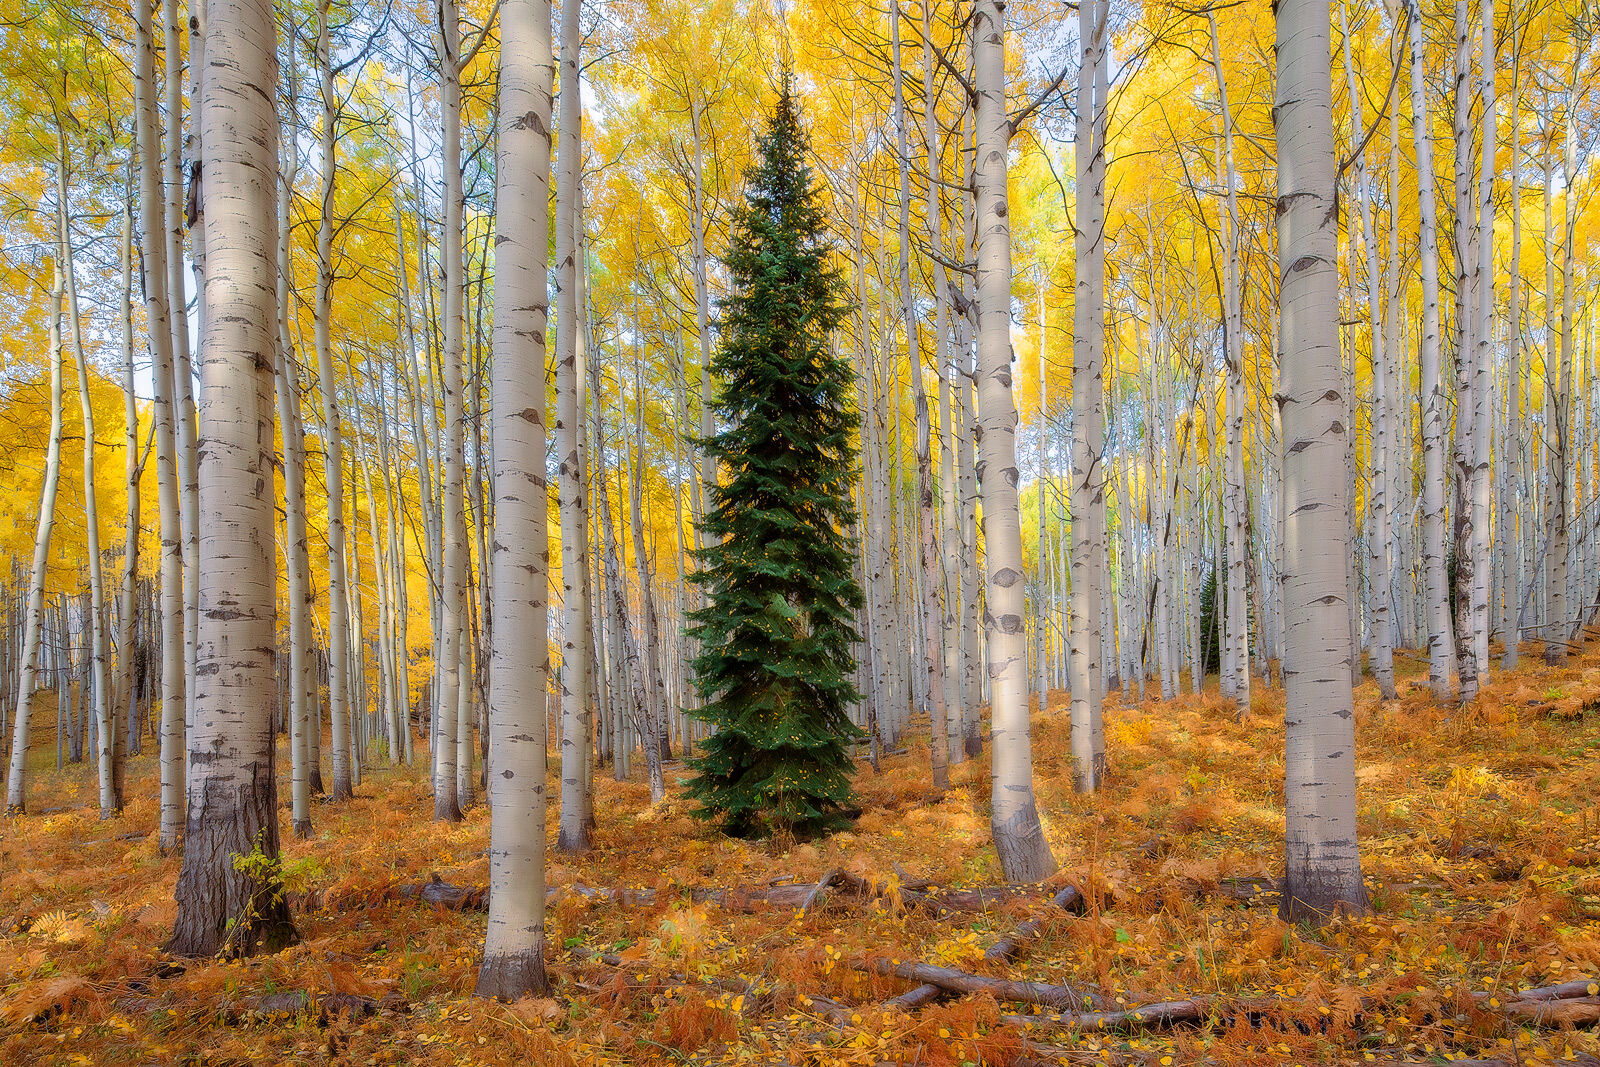 One tall spruce tree grows in the middle of the aspen forest with yellow leaves on the tree and orange brush on the ground. 